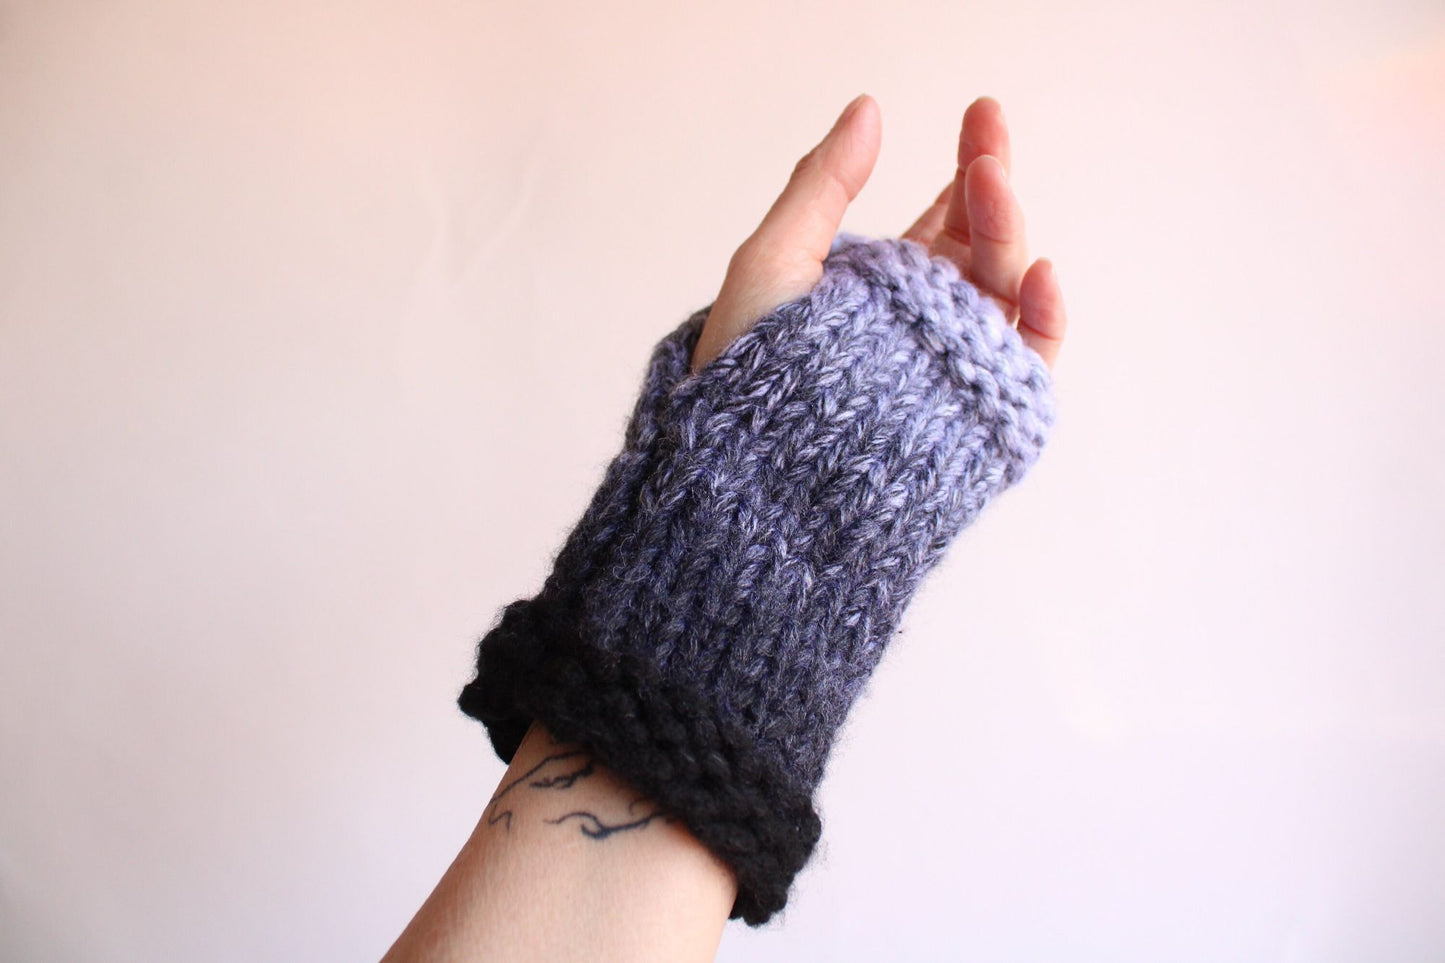 "Winter Ash" Hand Knit Fingerless Gloves, Armwarmers in Ombre Black, Gray and White